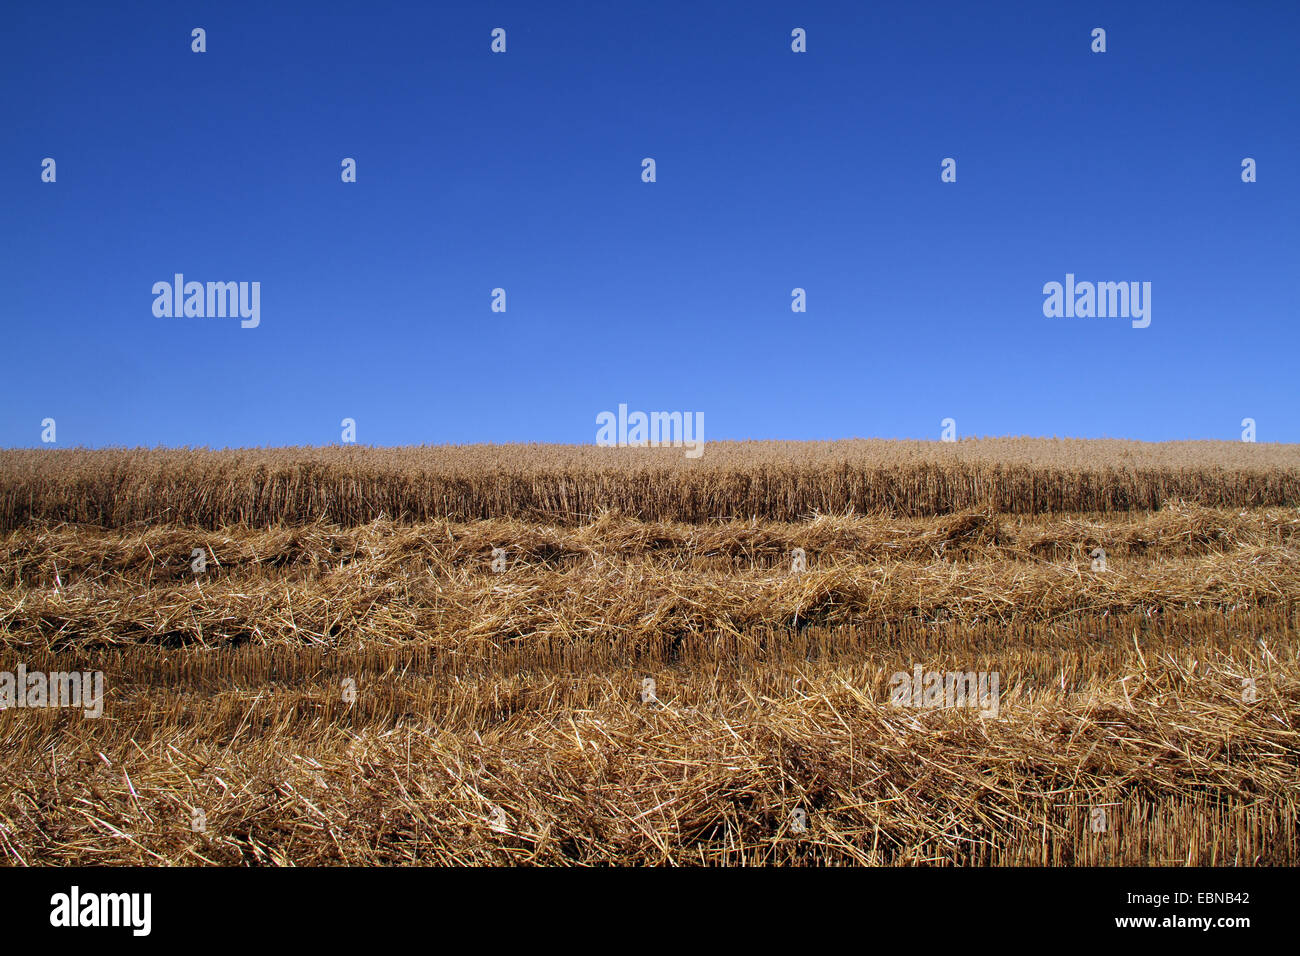 cultivated oat, common oat (Avena sativa), ripe oatfield is harvested, Germany Stock Photo